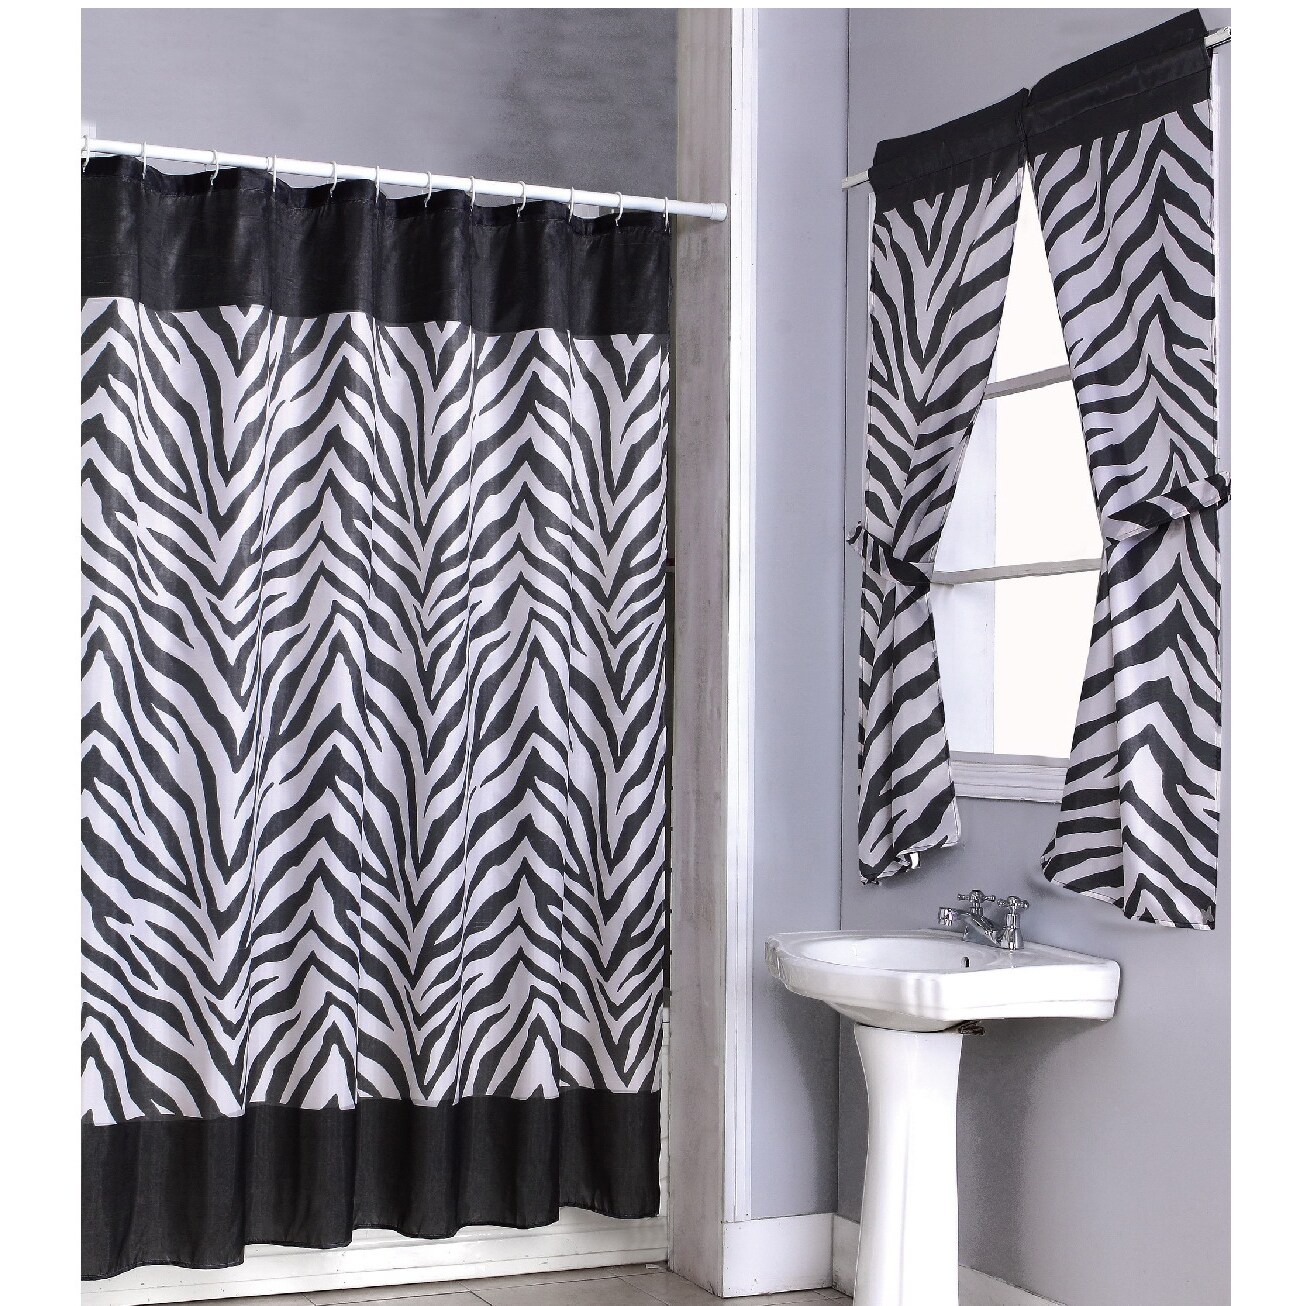 Zebra Print Shower Curtain Set And 4 piece Window Set (ZebraWindow PanelConstruction Pocket rodLining UnlinedDimensions curtain = 54 inches long x 34 inches wideMaterials Polyester/ PVCTiebacks included Care instructions Machine washableShower curtai